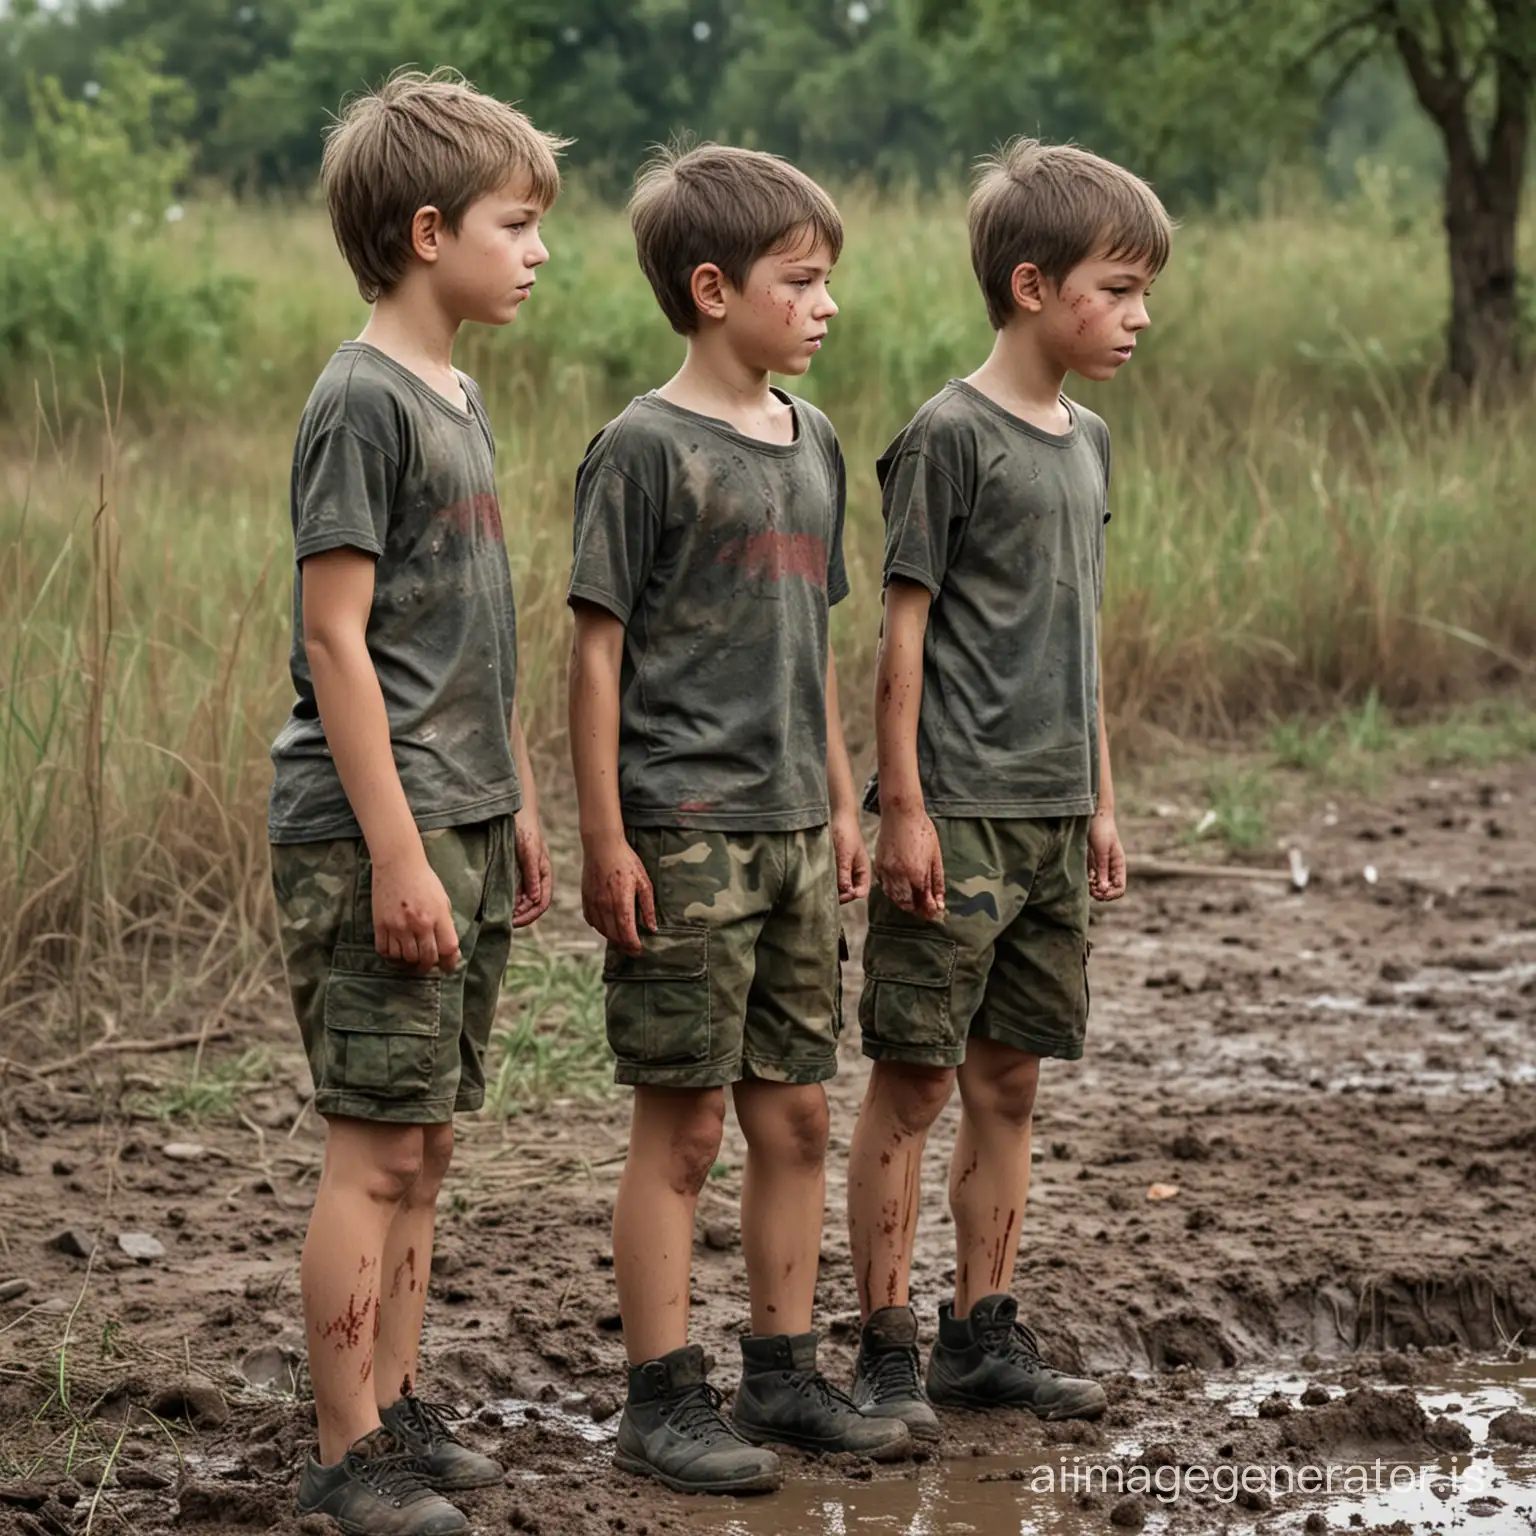 draw a picture of two beautiful 10-year-old  Caucasian boys with short hair, wearing short, thin army camouflage t-shirts and shorts, standing at attention face to face neatly on the muddy grass, with their chests lifting up, and with some wound and blood on their chests. The scene should be peaceful and reflect a serene sacrifice, capturing the innocence, playful and bravery of youth.   